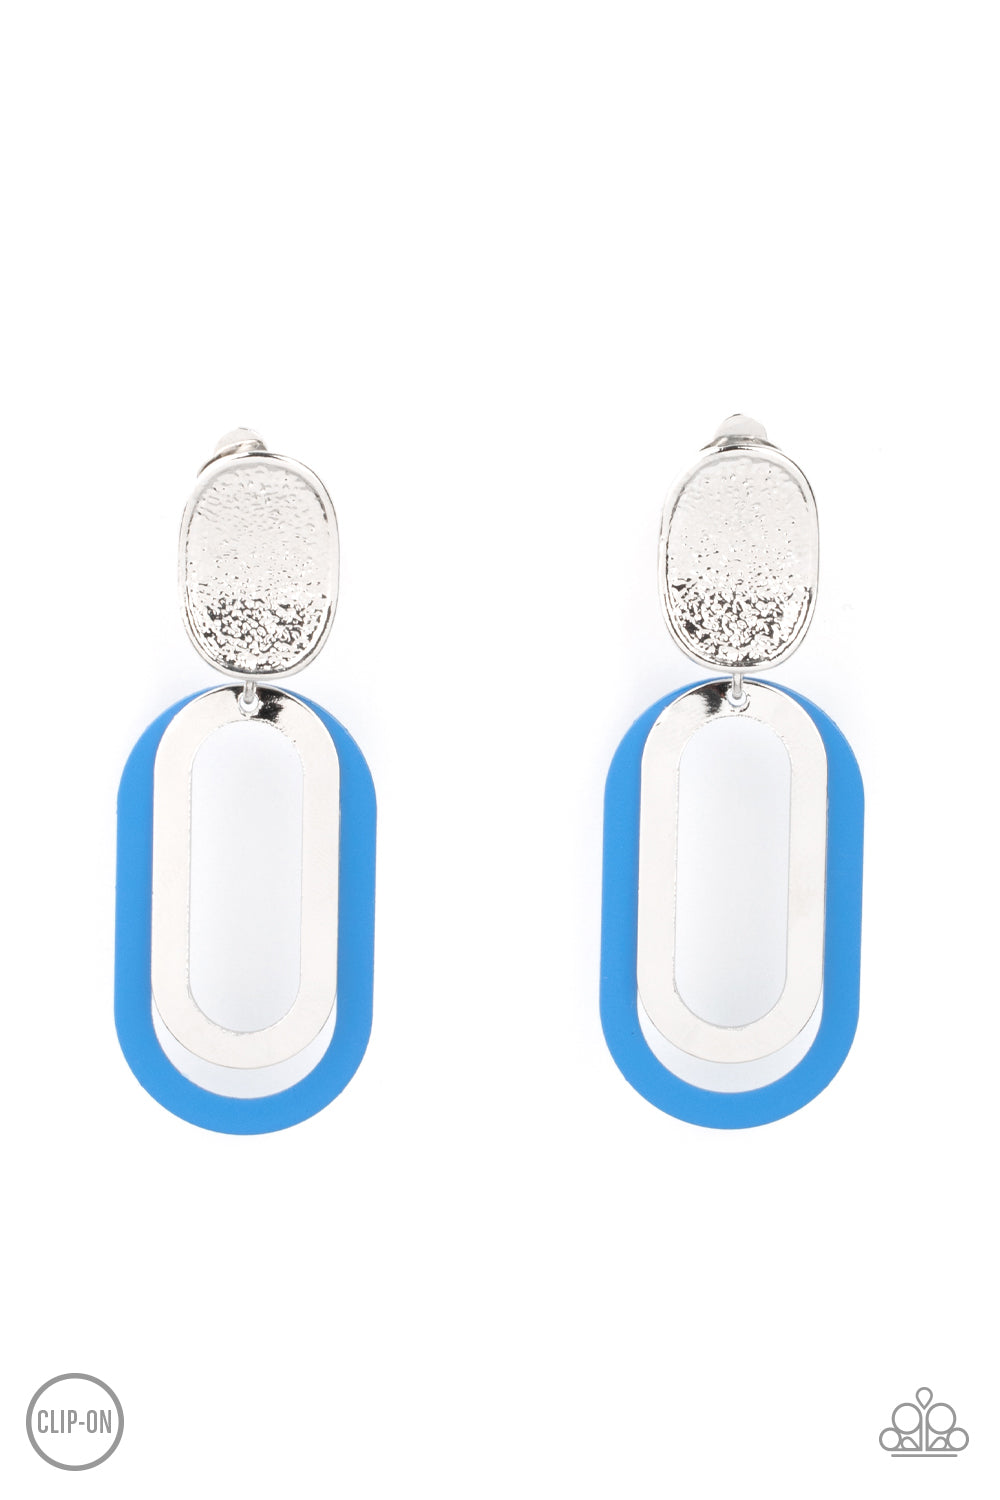 Melrose Mystery Blue Clip-On Earring - Paparazzi Accessories  Shiny silver and French Blue oblong hoops dangle from a shimmery textured silver oval disc for an upscale finale. Earring attaches to a standard clip-on fitting.  All Paparazzi Accessories are lead free and nickel free!  Sold as one pair of clip-on earrings.